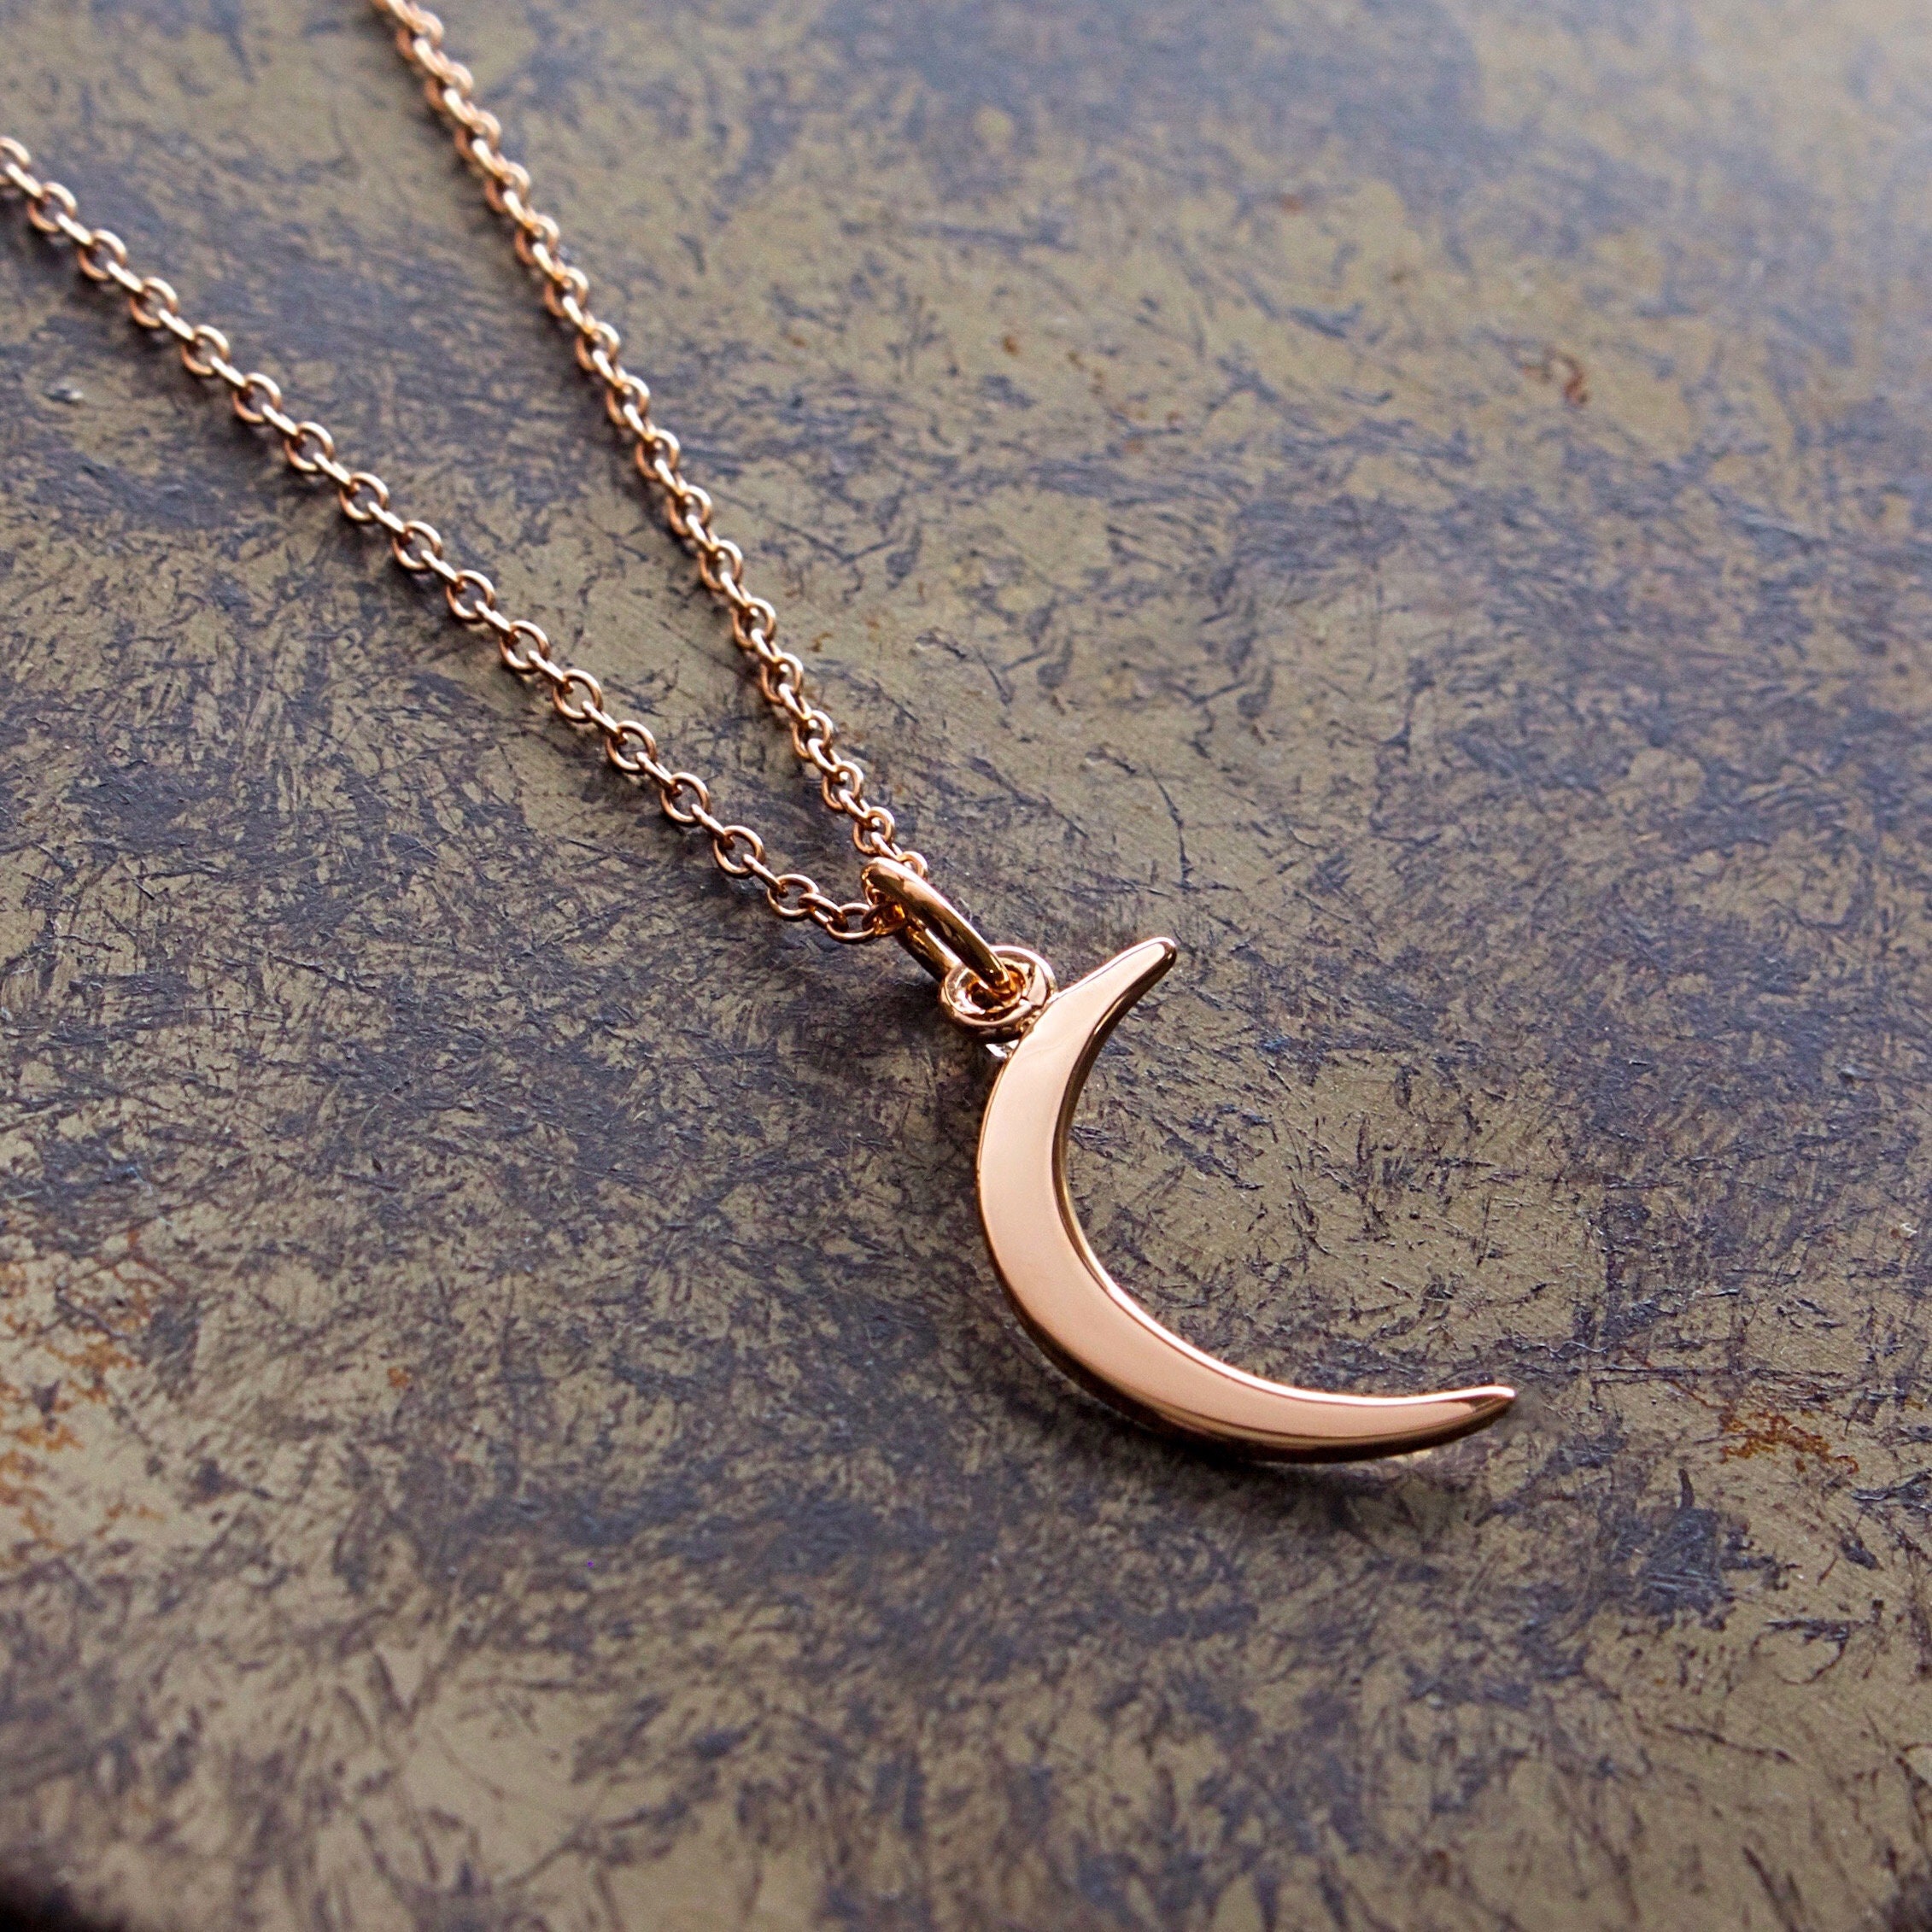 Cute Rose Gold Necklace - Moon Charm Necklace - Layered Necklace